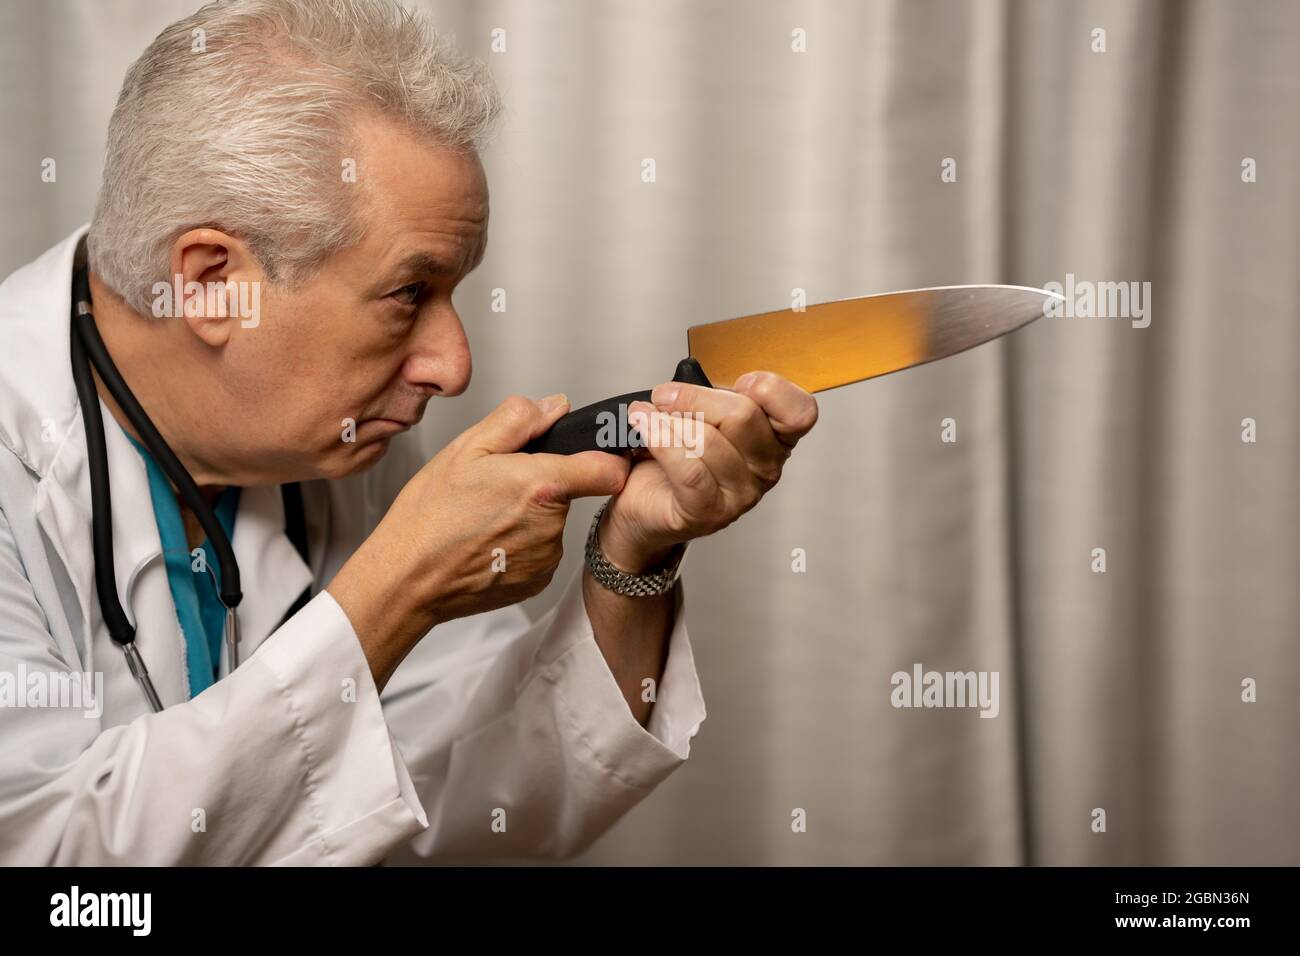 Evil medical doctor holding knife in hand to murder his patients Stock Photo